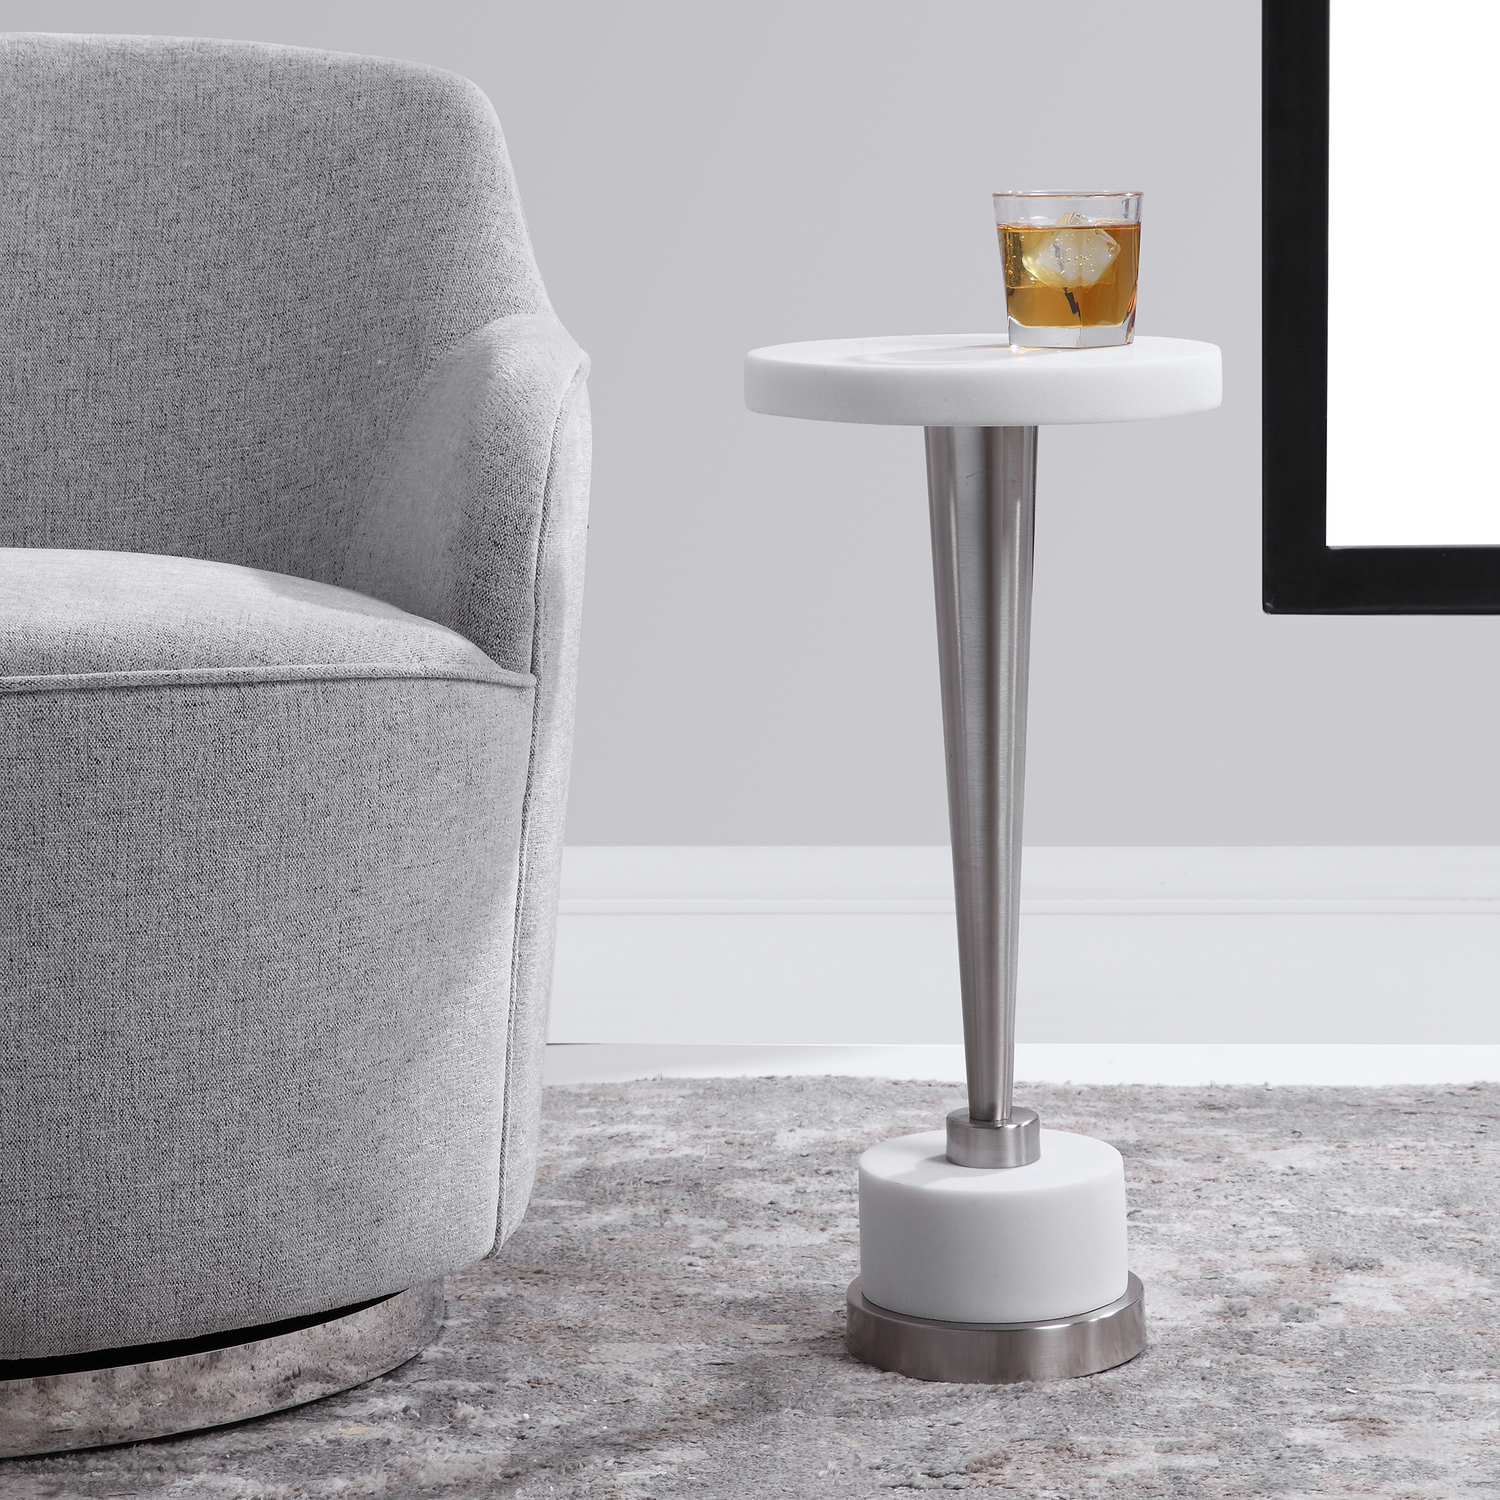 c style end table Uttermost Accent & End Tables A Perfect Landing Spot For A Drink Or A Book, This Mixed Material Accent Elevates The Sophisticated Feel Of A White Marble Look With Modern Accents Of Brushed Nickel Plated Metal.